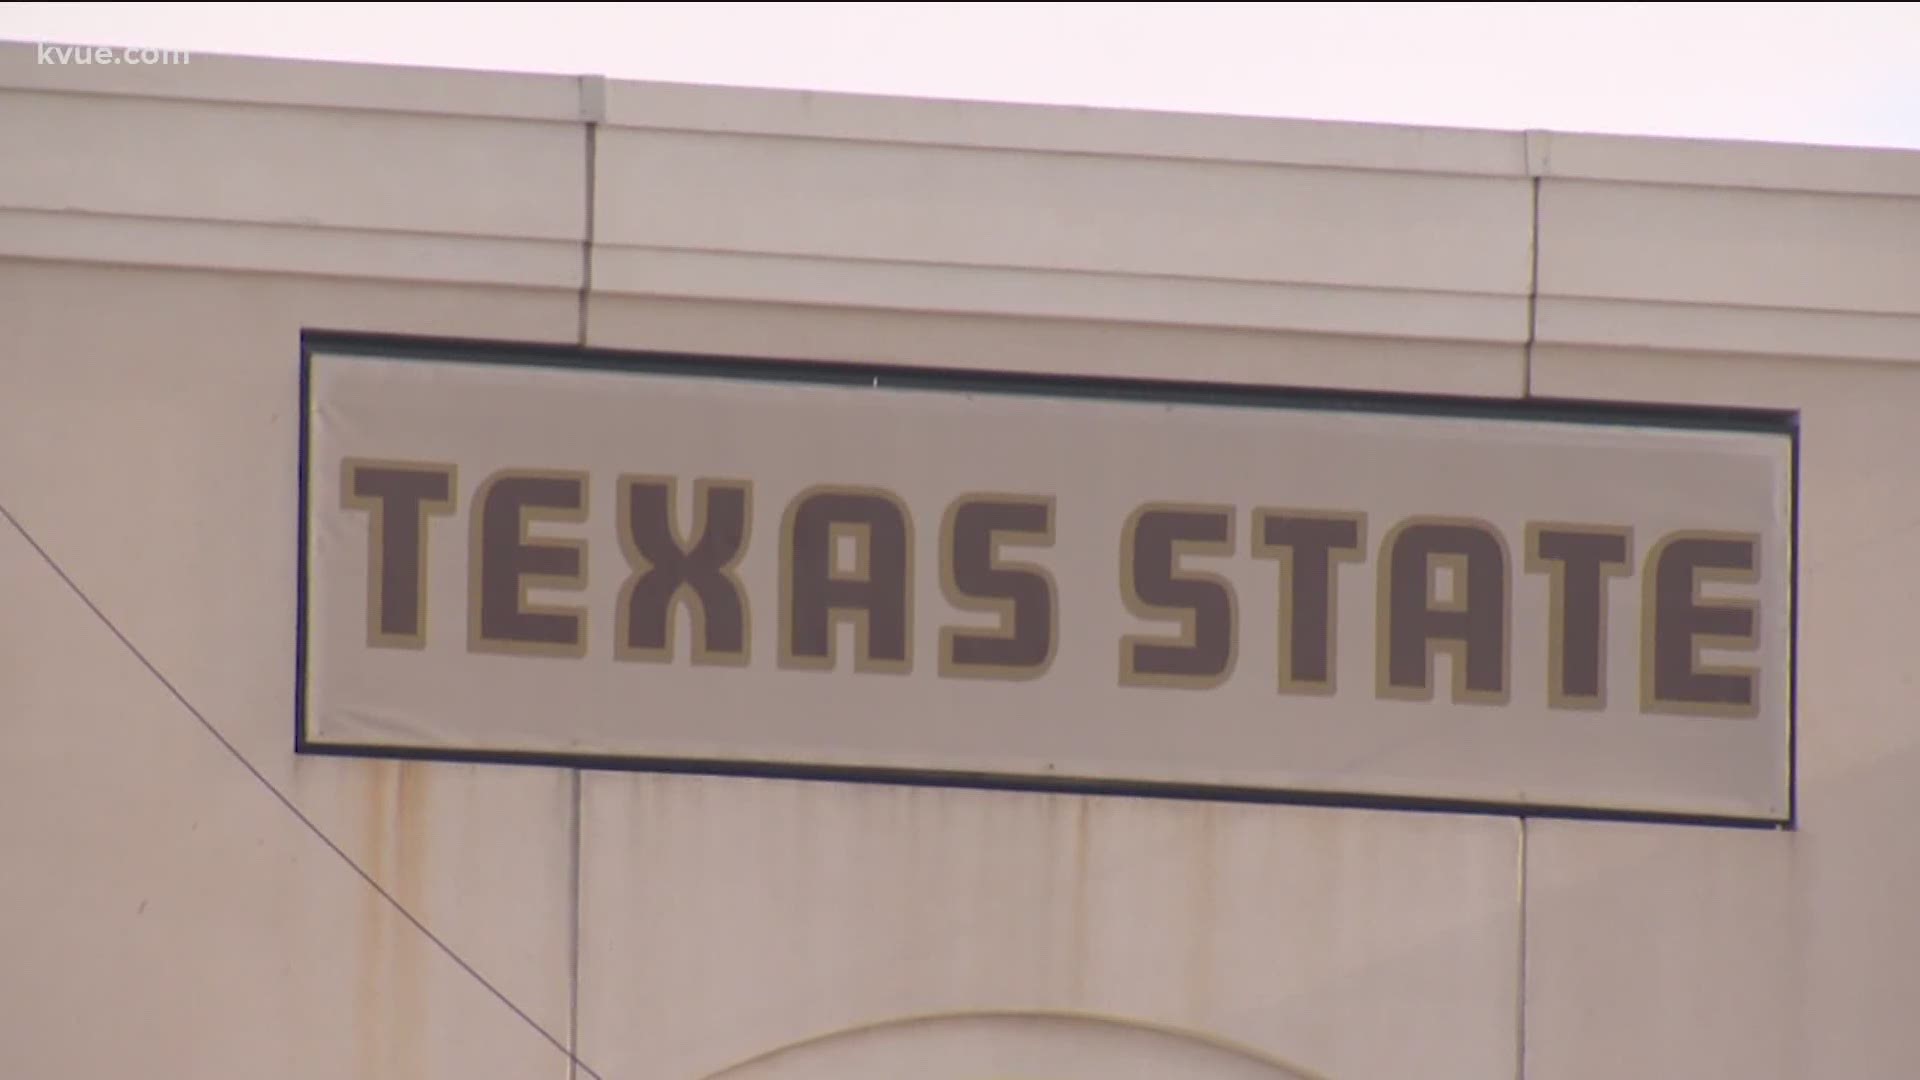 The Texas State Bobcats have been preparing for its 2020 season amid the COVID-19 pandemic.